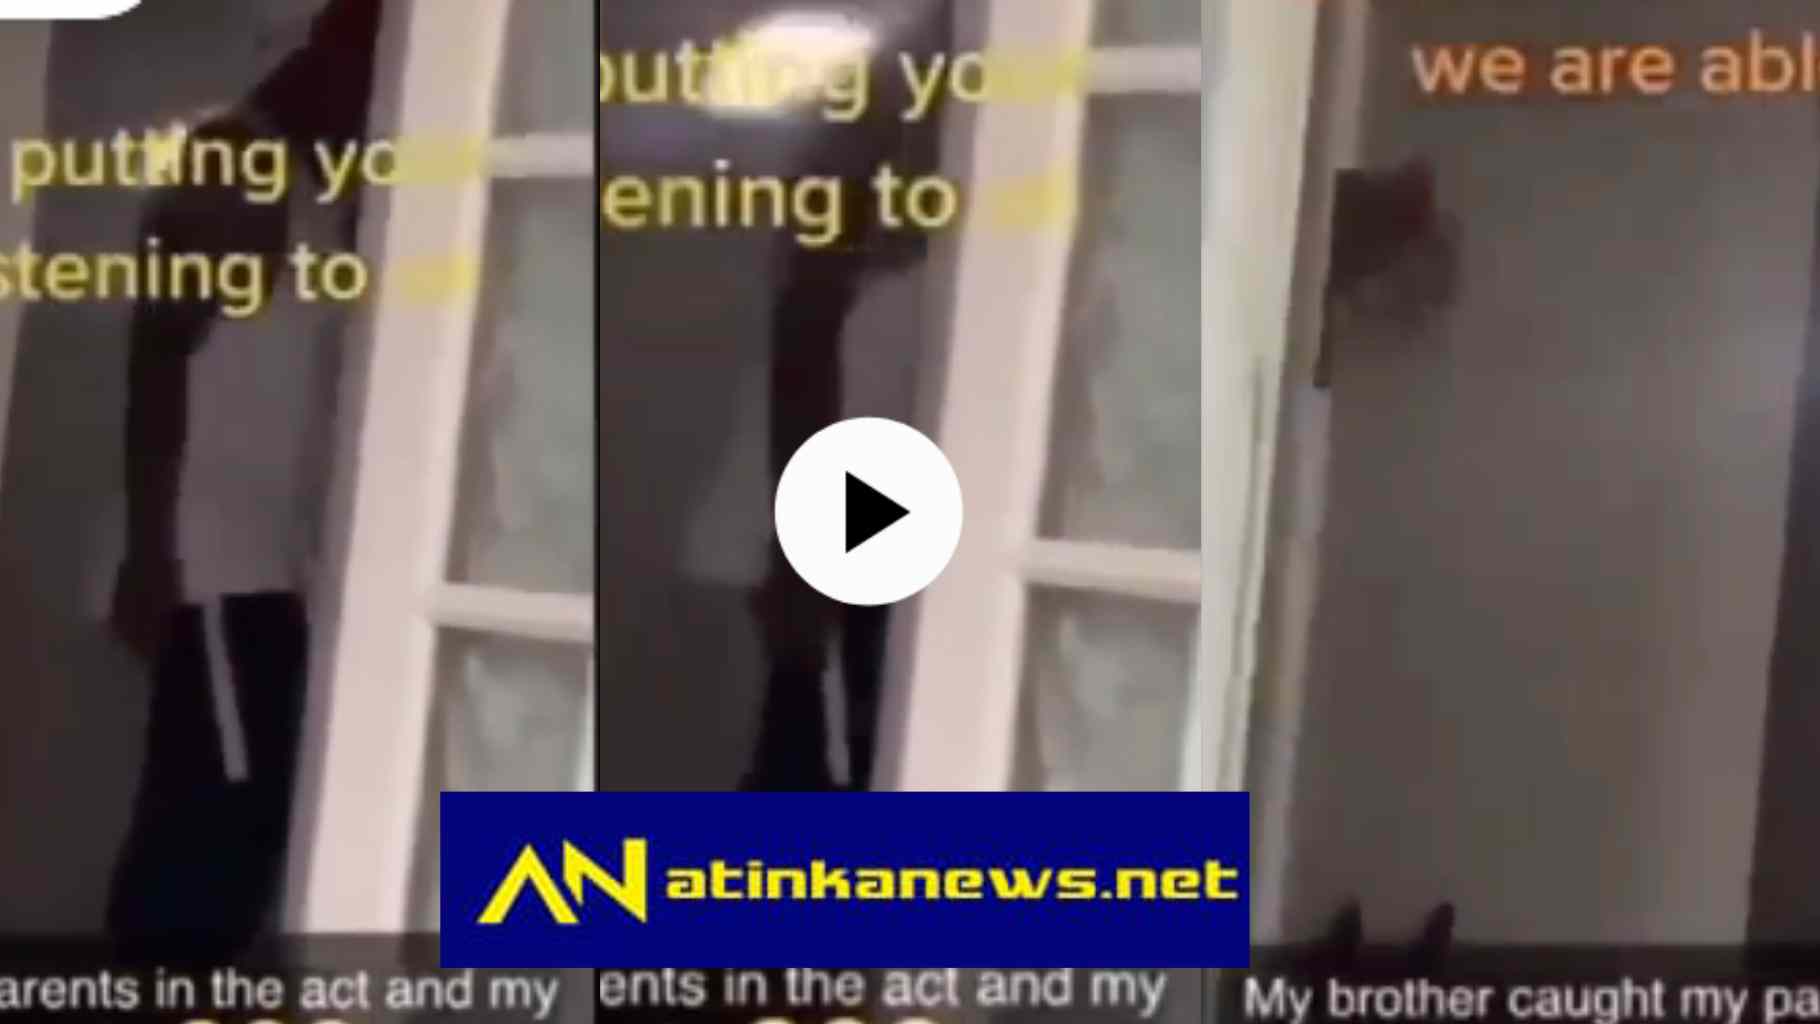 Boy busted peeping through the door to watch his parents